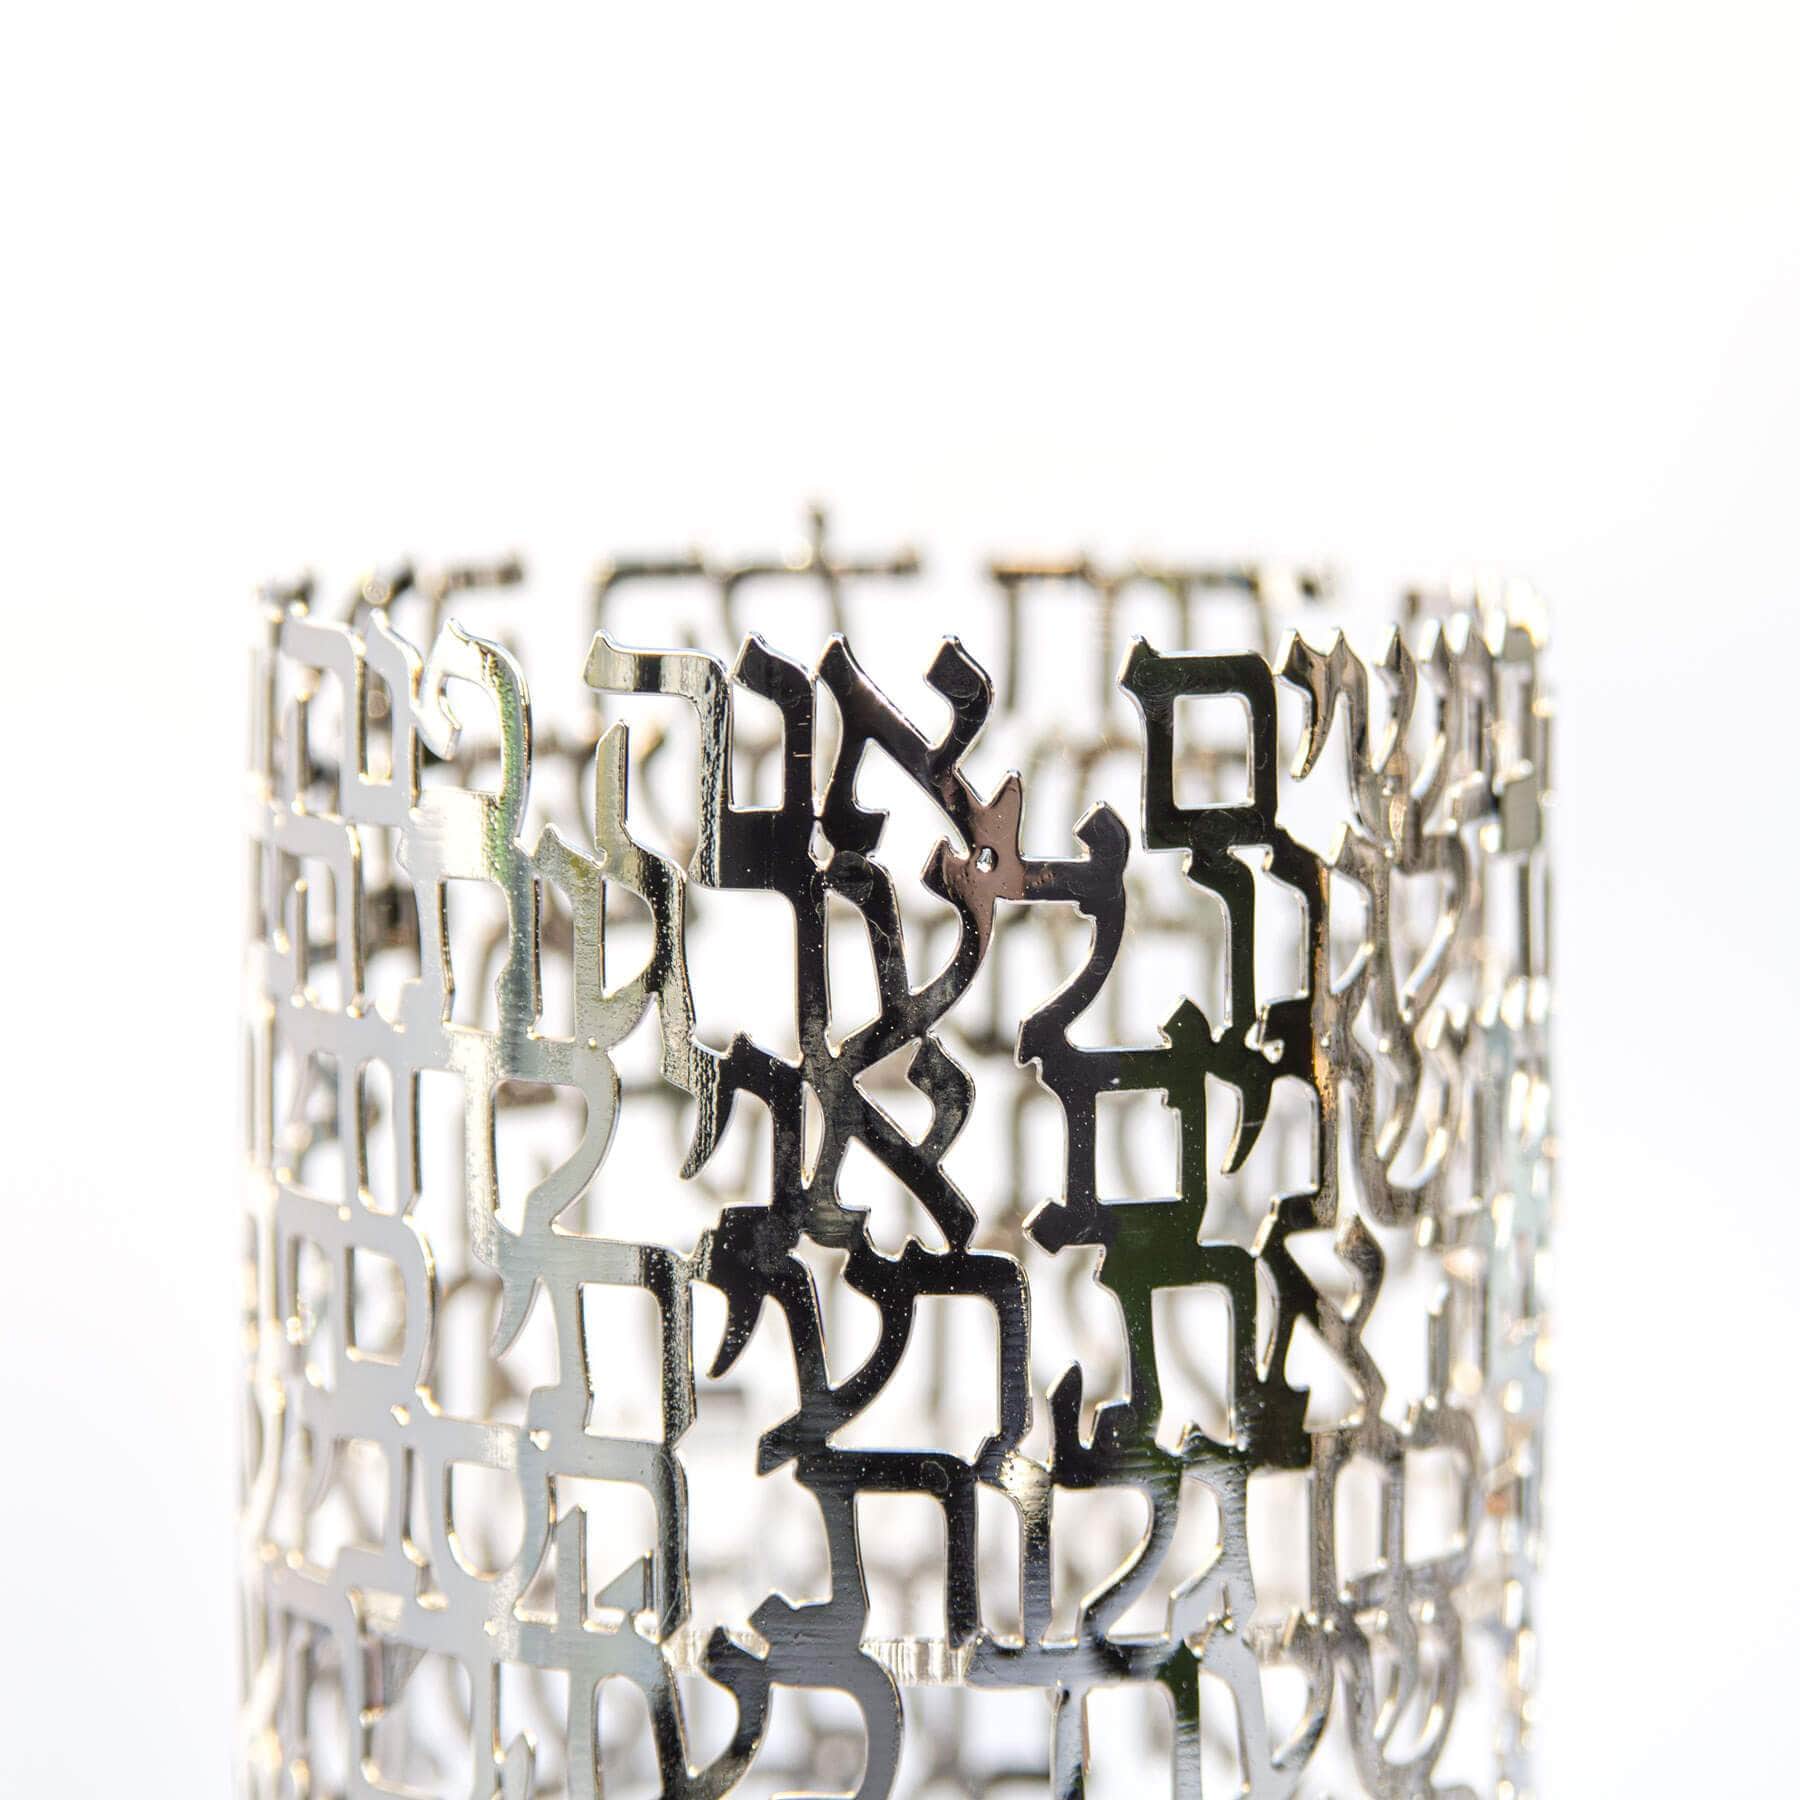 Hoshen Designs Candlesticks "I Am My Beloved’s" Ani L'dodi Song of Songs Candleholders - White Gold